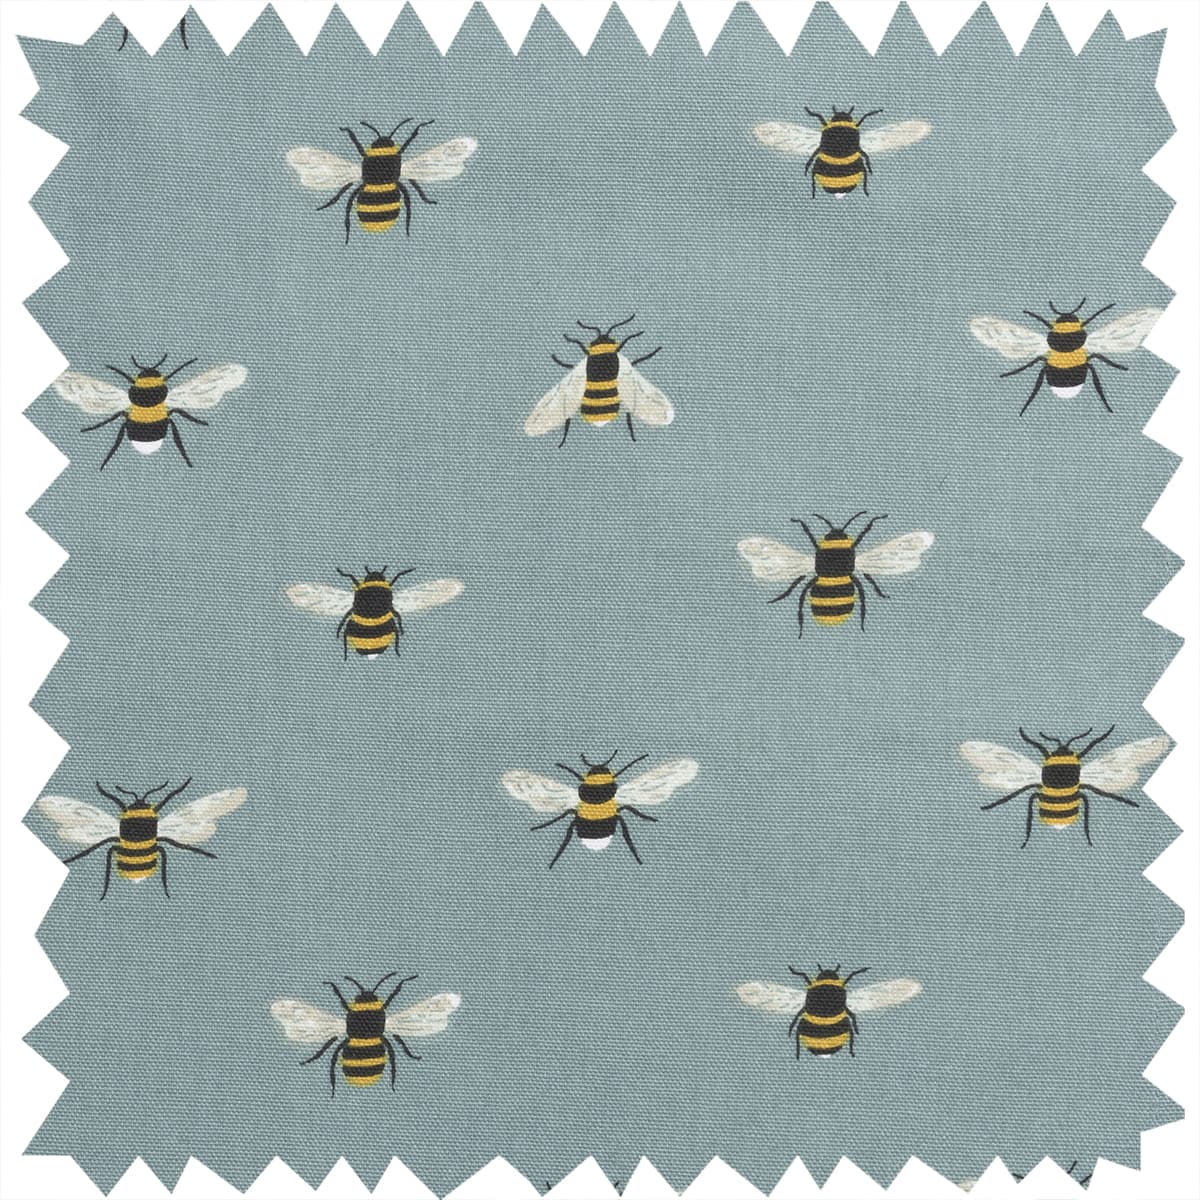 Bees Teal Adult Apron